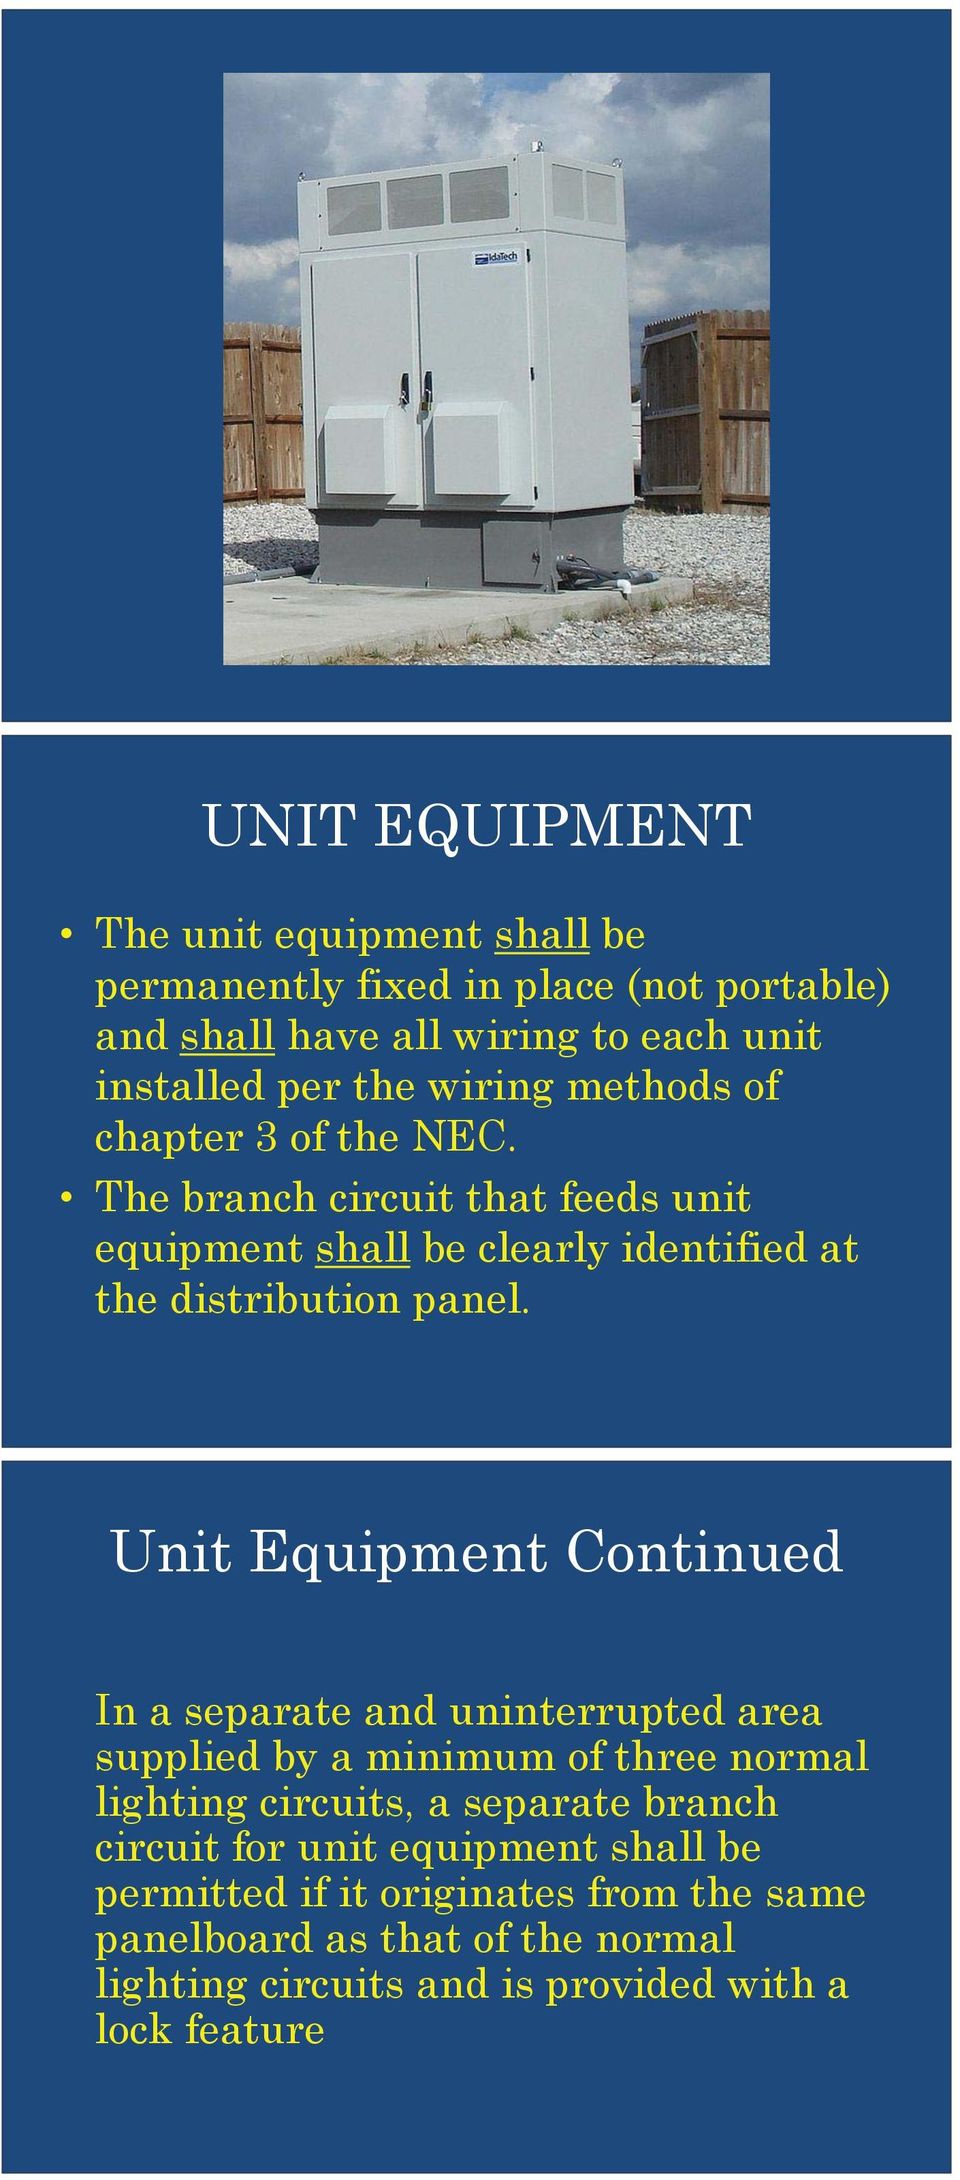 Unit Equipment Continued In a separate and uninterrupted area supplied by a minimum of three normal lighting circuits, a separate branch circuit